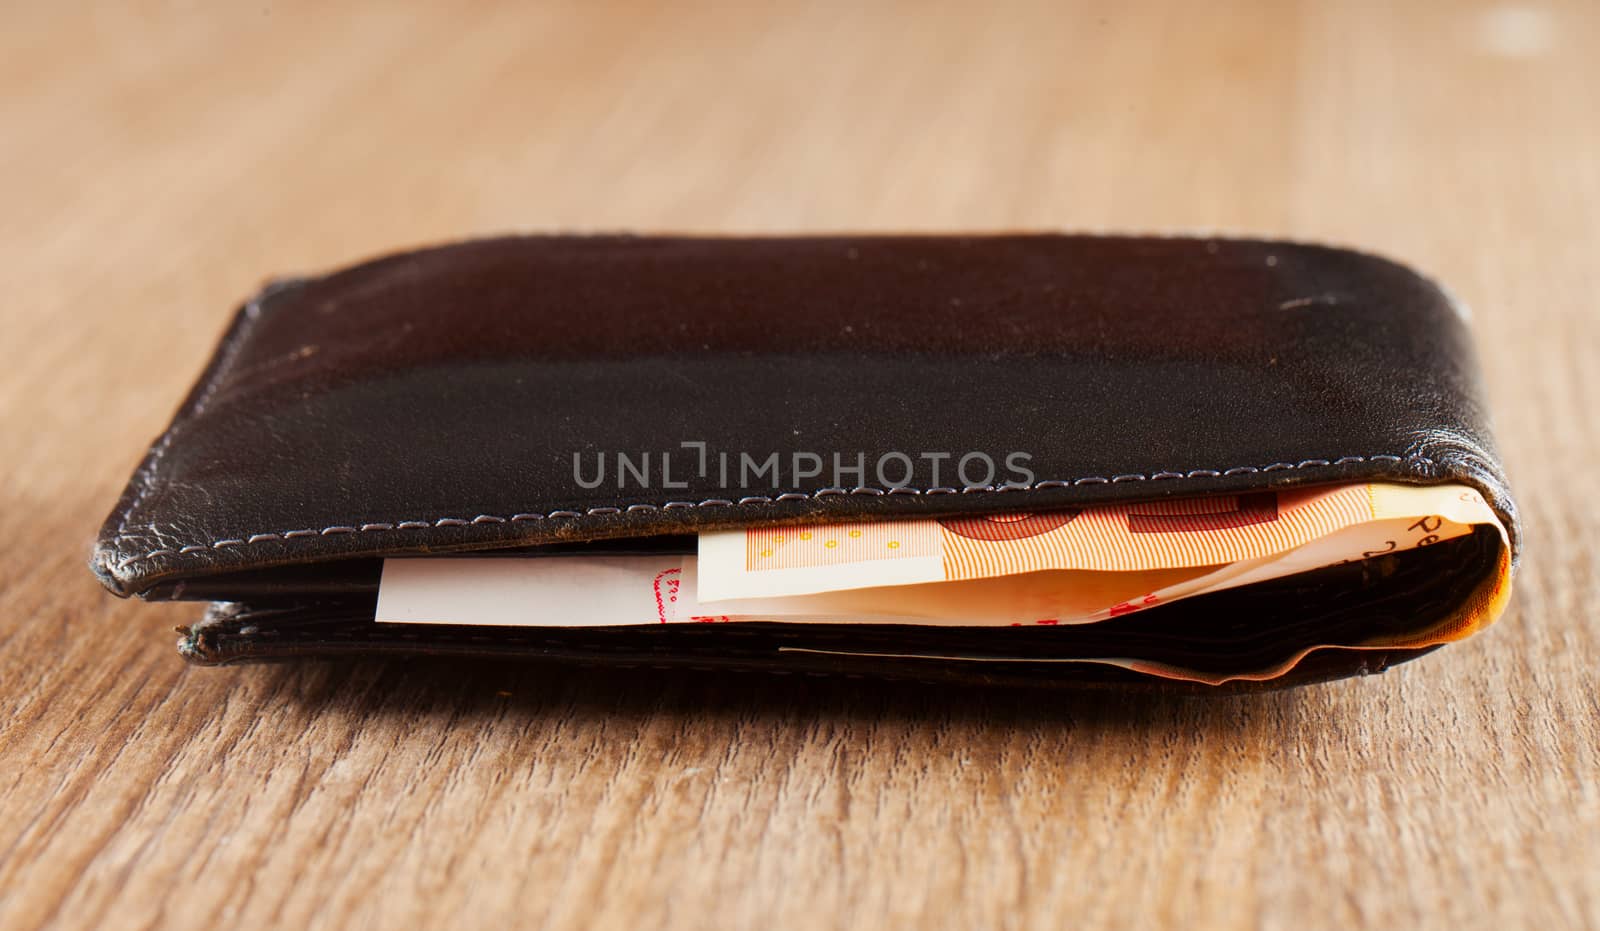 Full black wallet over a wooden table